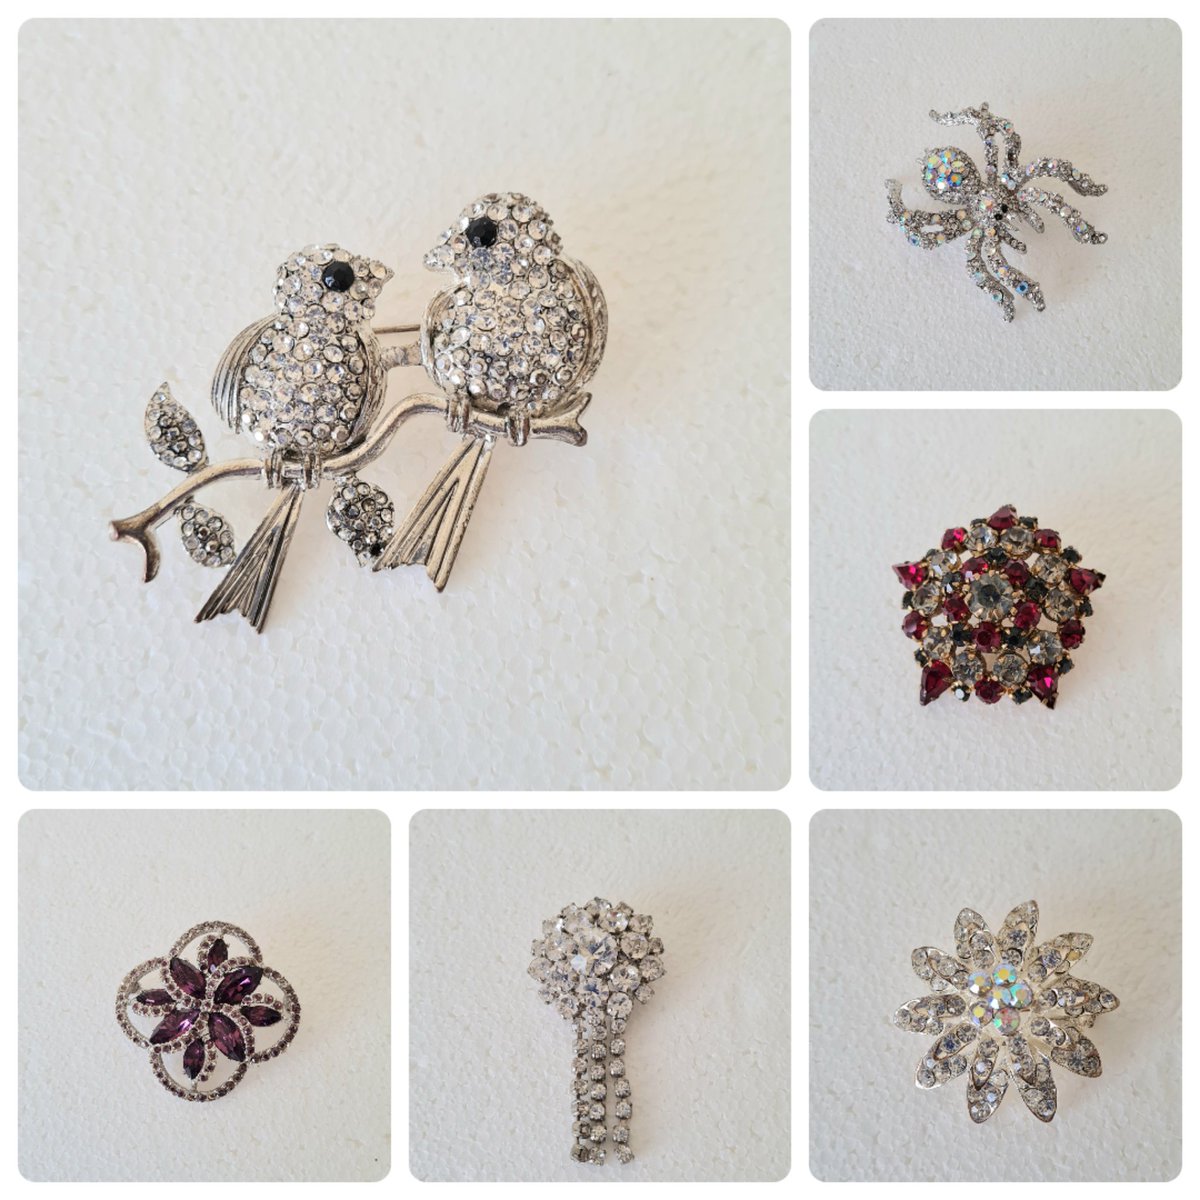 #costumejewellery
#vintagebrooches

Visit posh-recycled.co.uk